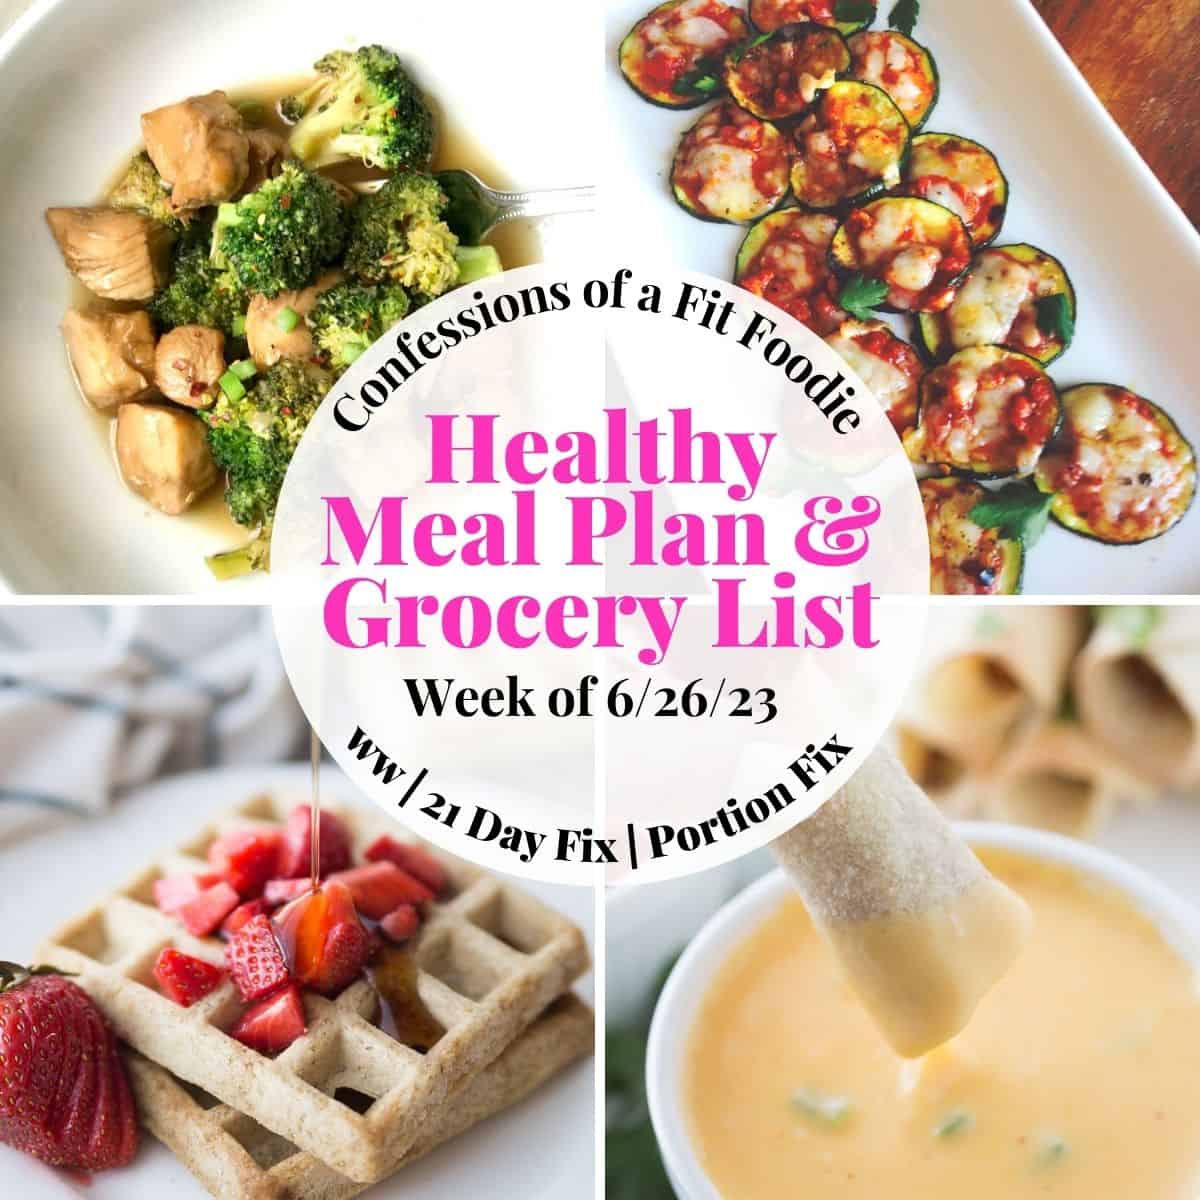 Food photo collage with pink and black text on a white circle. Text says, "Healthy Meal Plan & Grocery List Week of 6/26/23"